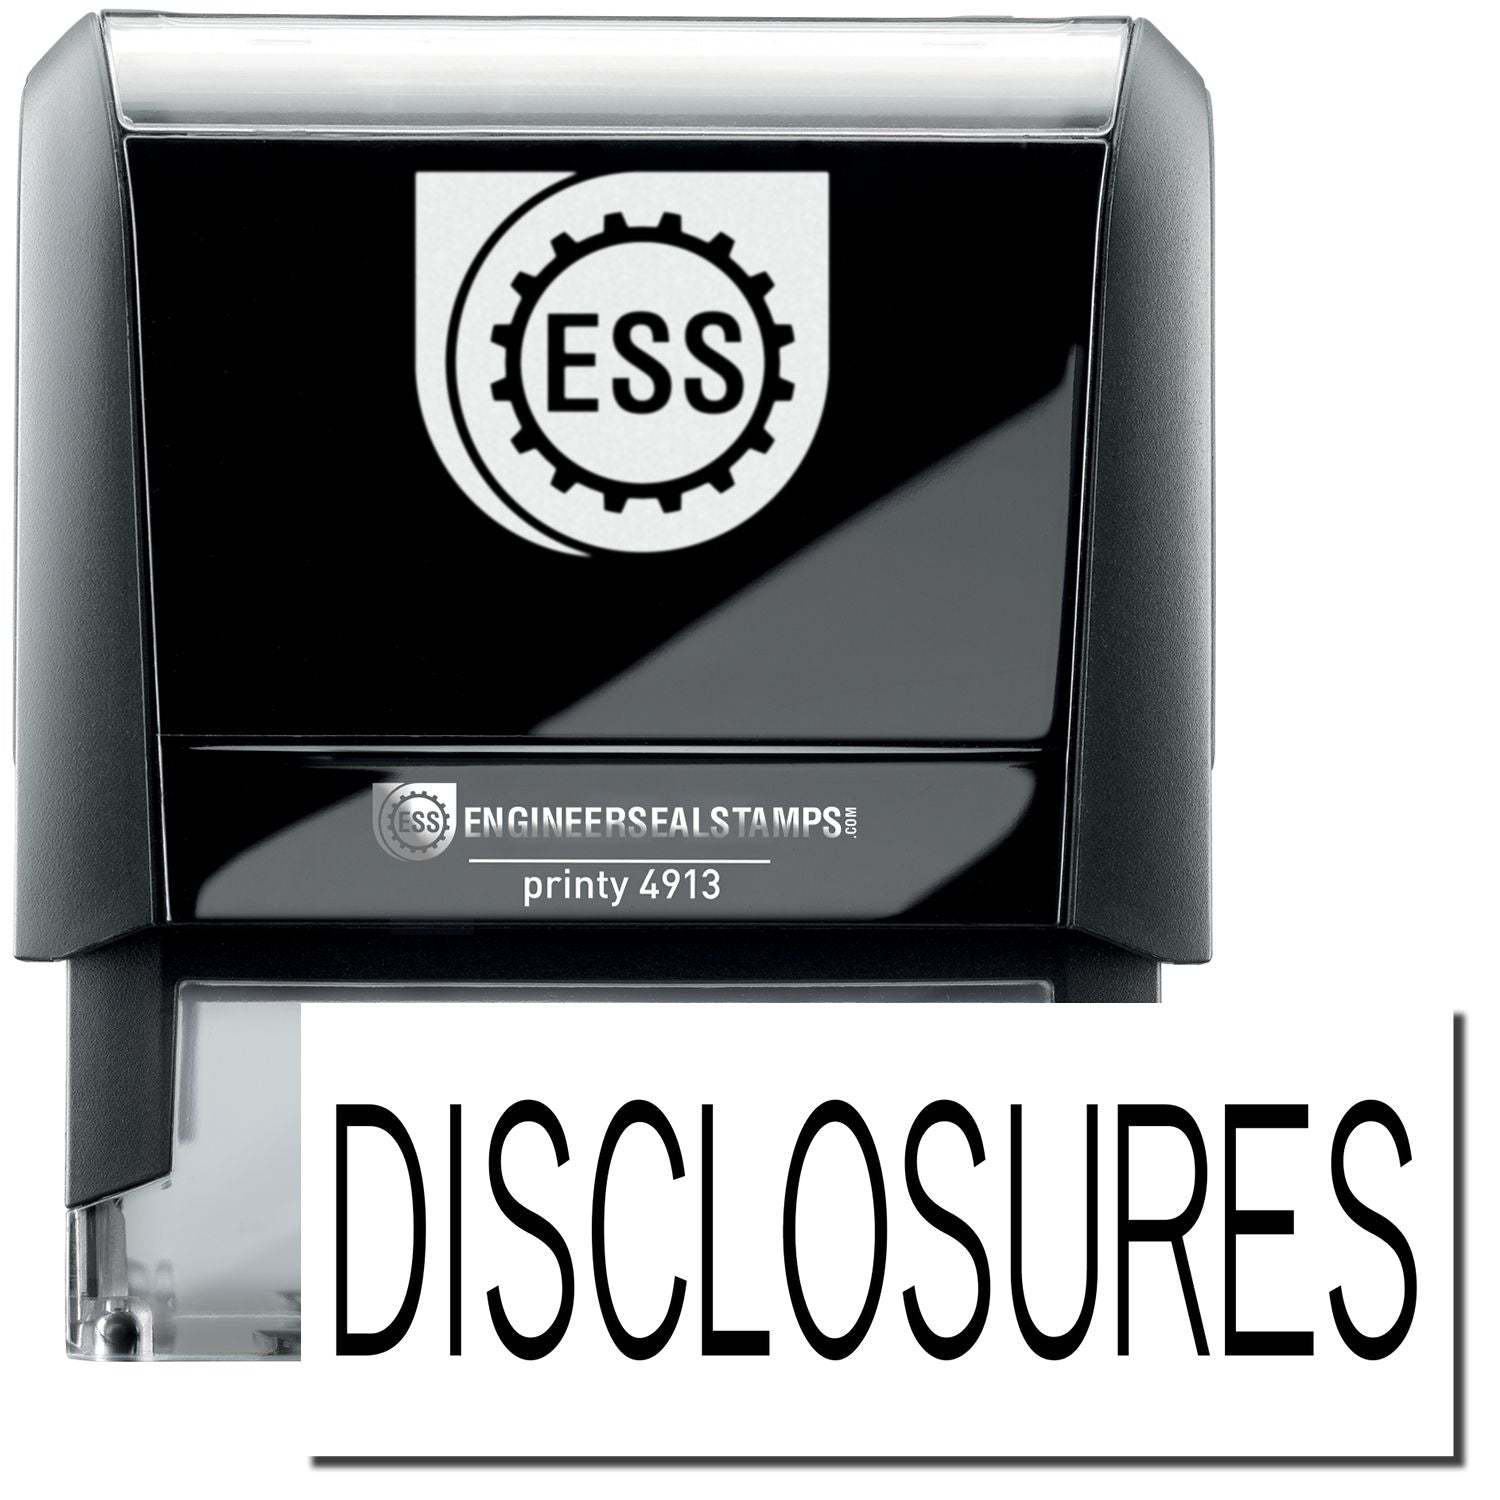 A self-inking stamp with a stamped image showing how the text "DISCLOSURES" in a large bold font is displayed by it.